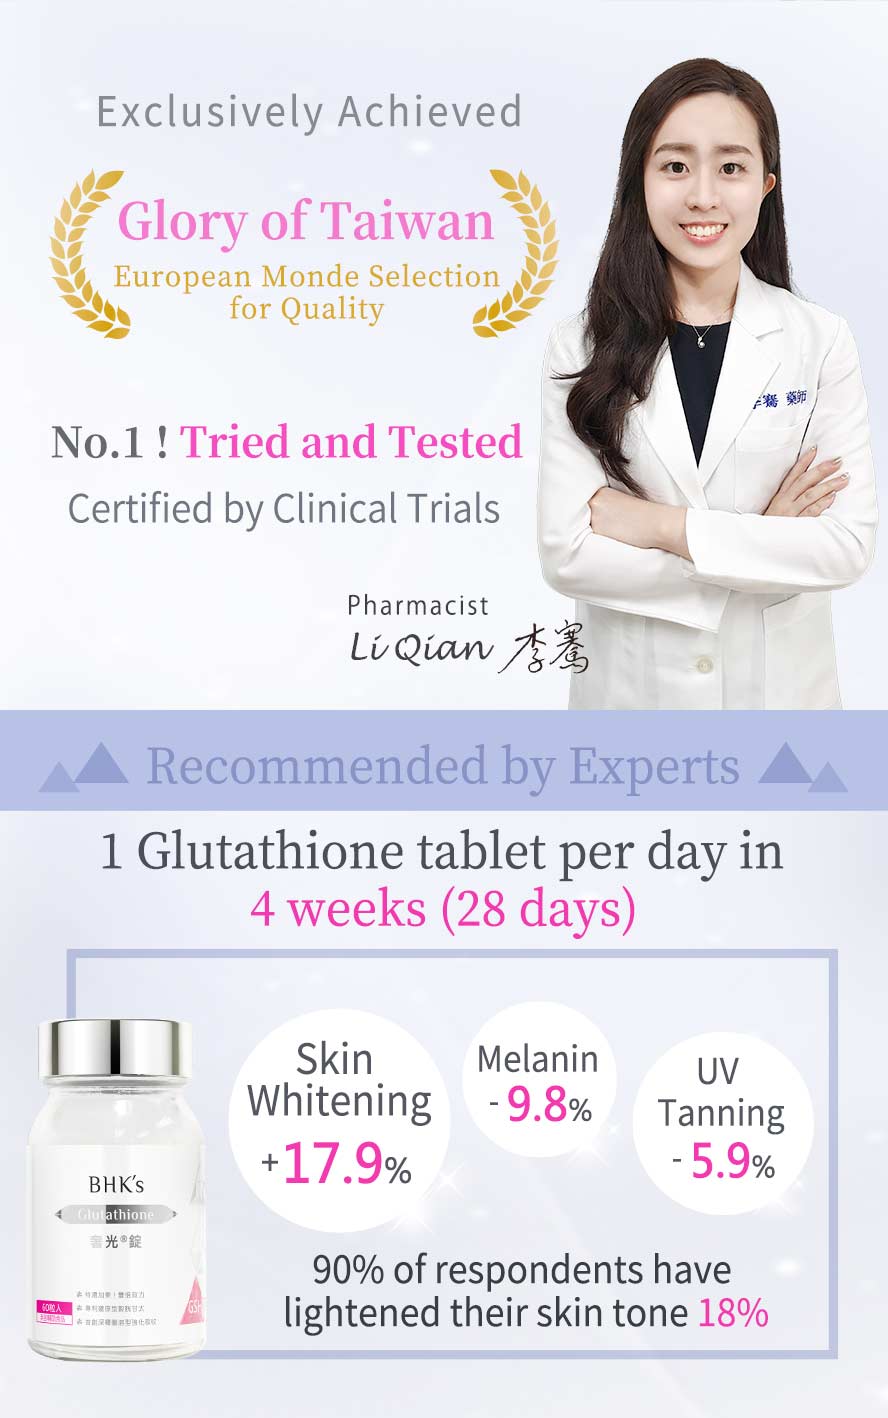 With the leading technology of refining the glutathione for absorption enhancement.